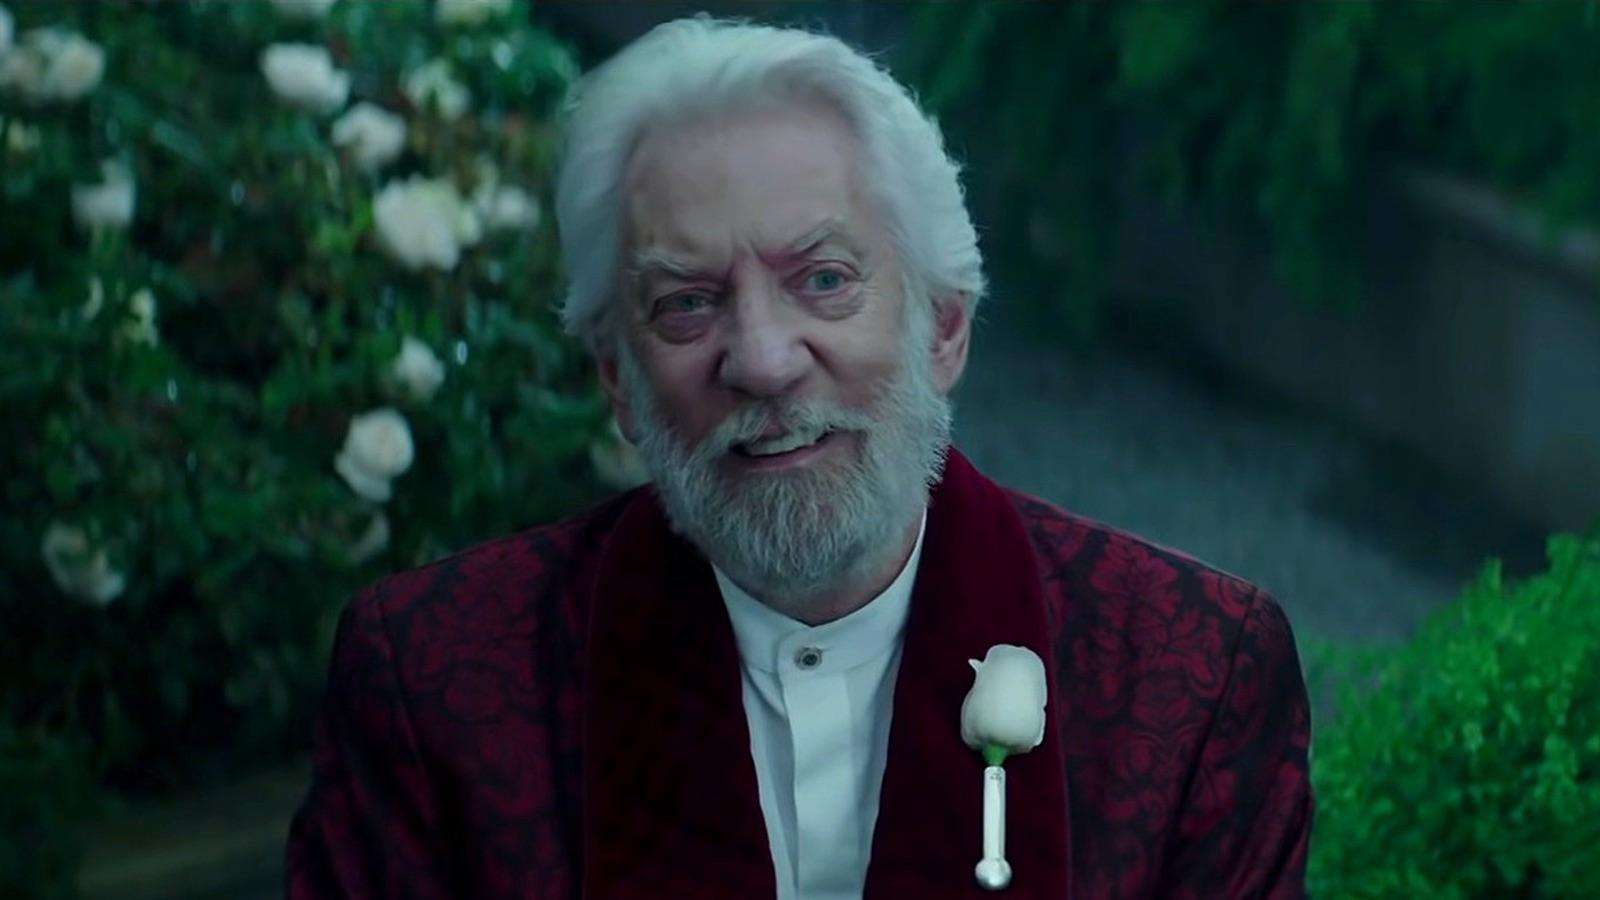 President Snow in the Hunger Games